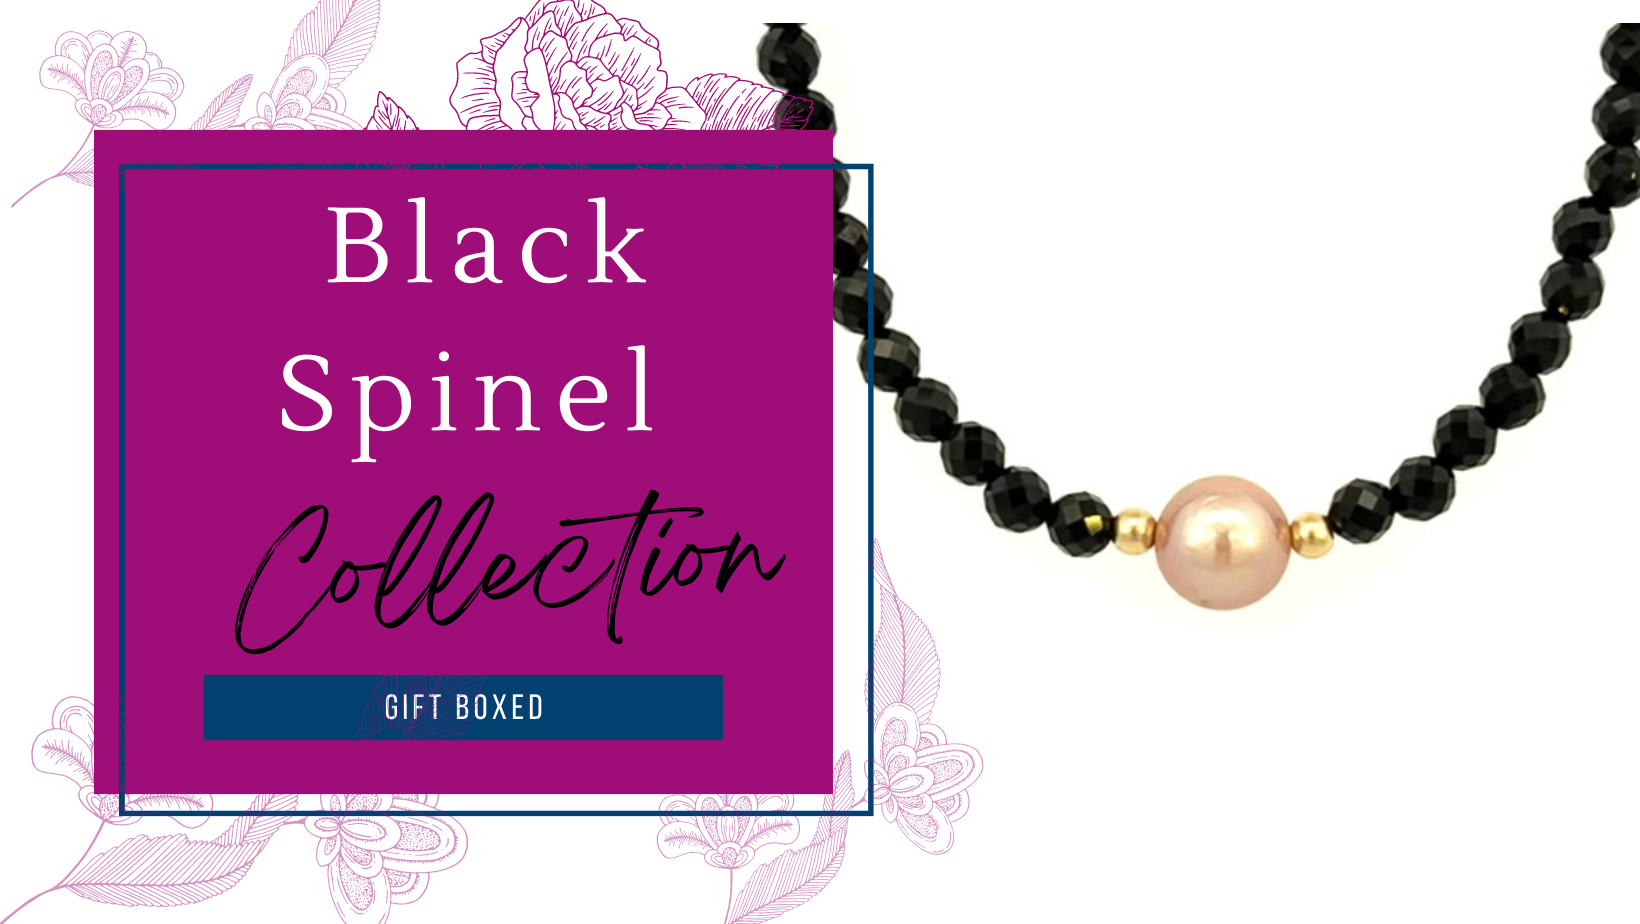 Black spinel collection